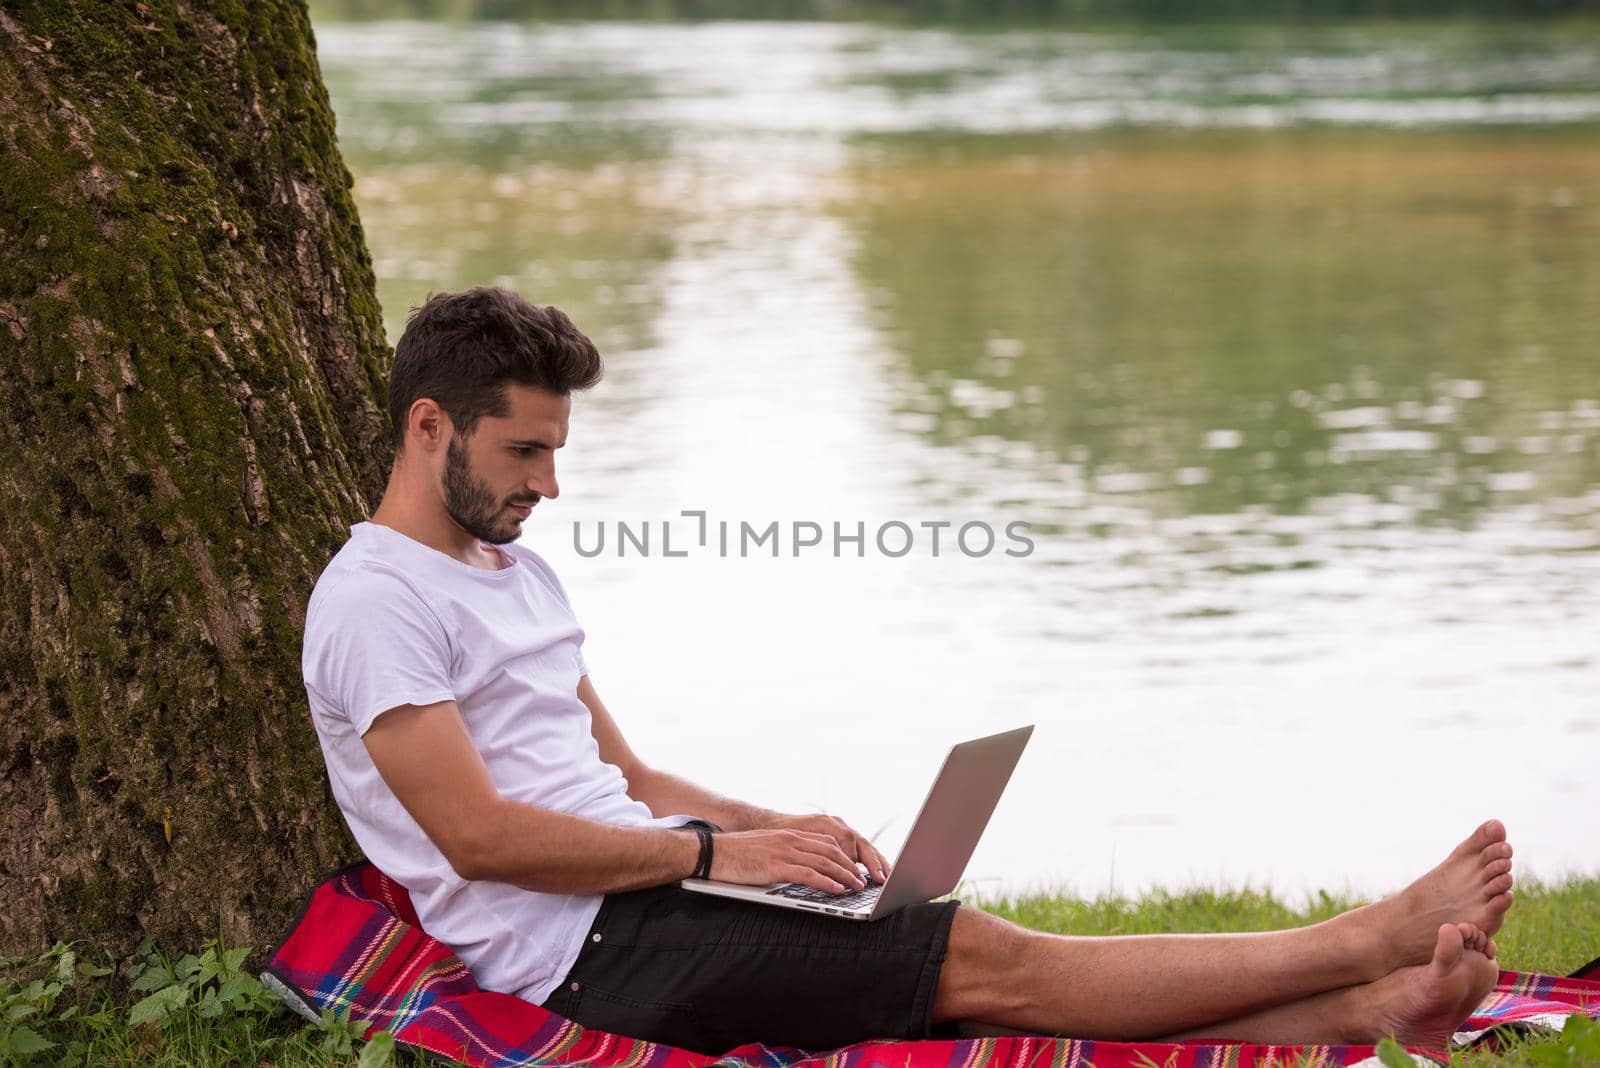 A young freelancer using a laptop computer while working in beautiful nature under the tree on the bank of the river